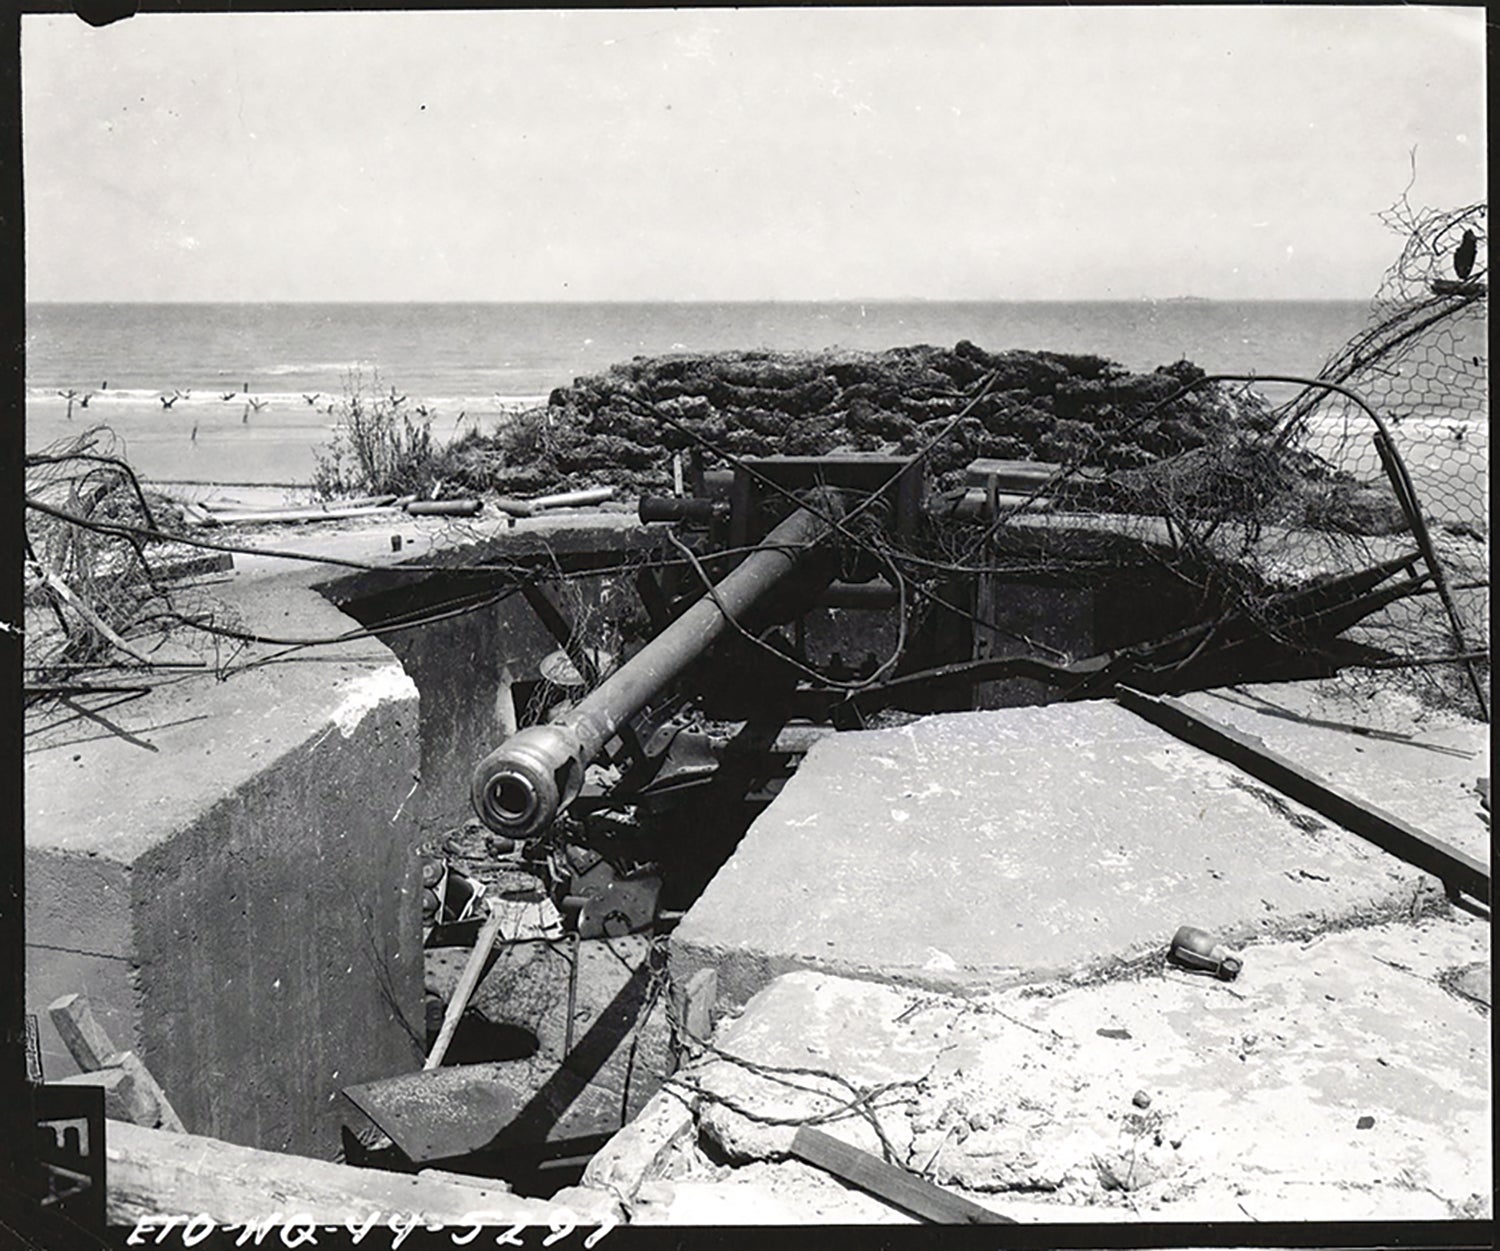 A burned-out German coastal gun emplacement destroyed by U.S. soldiers in France. (Credit: National Archives)